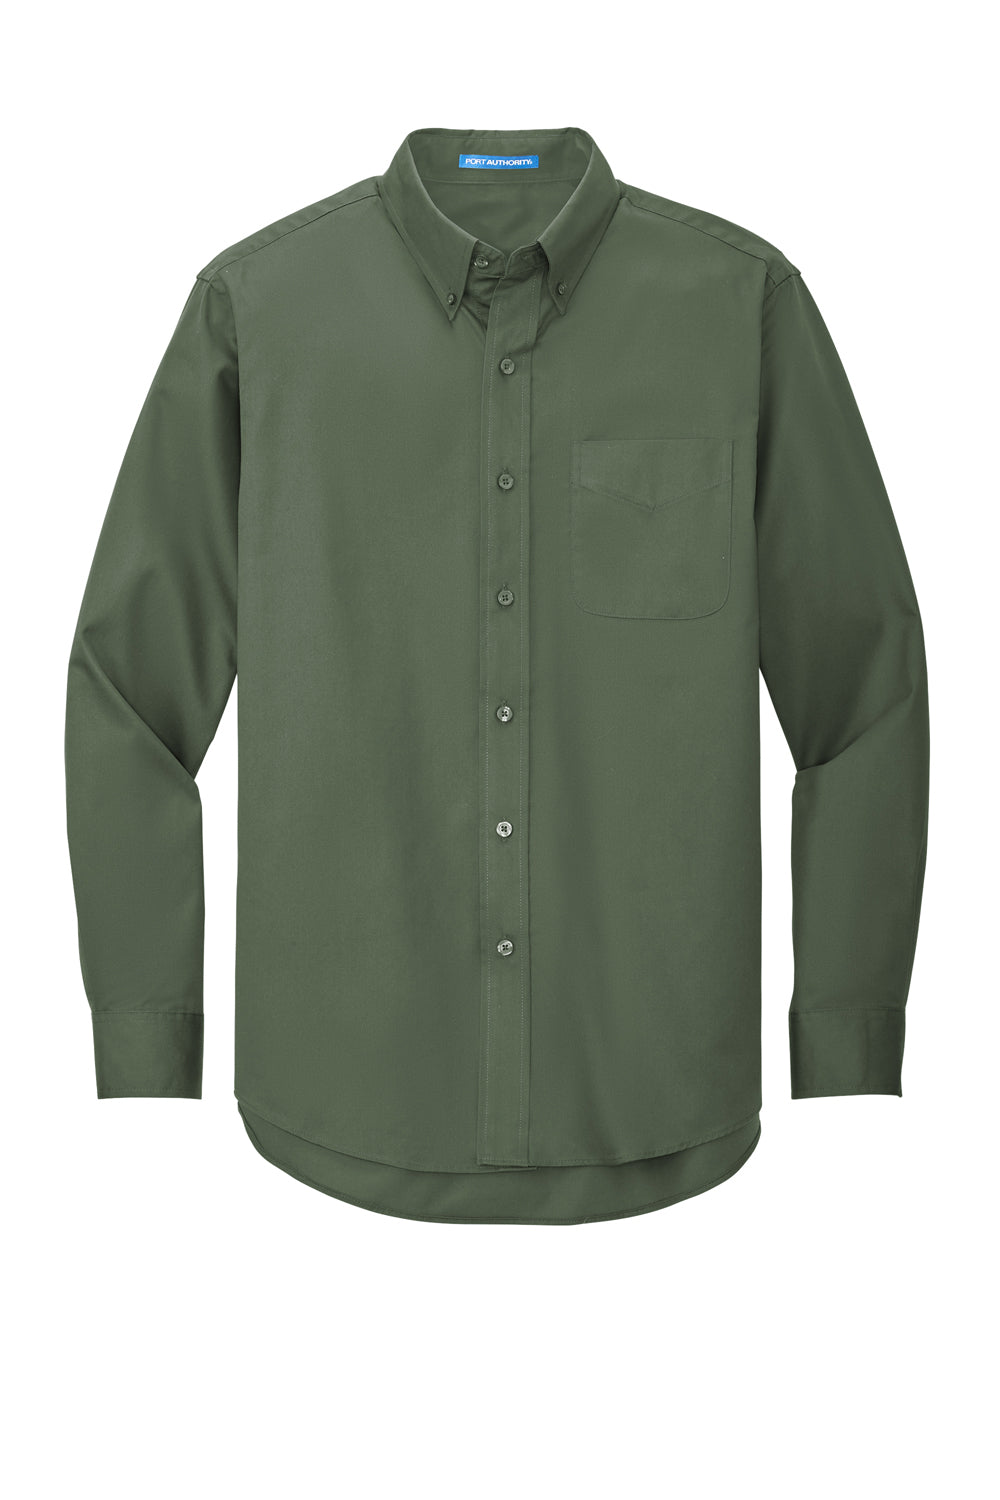 Port Authority S608/TLS608/S608ES Mens Easy Care Wrinkle Resistant Long Sleeve Button Down Shirt w/ Pocket Clover Green Flat Front